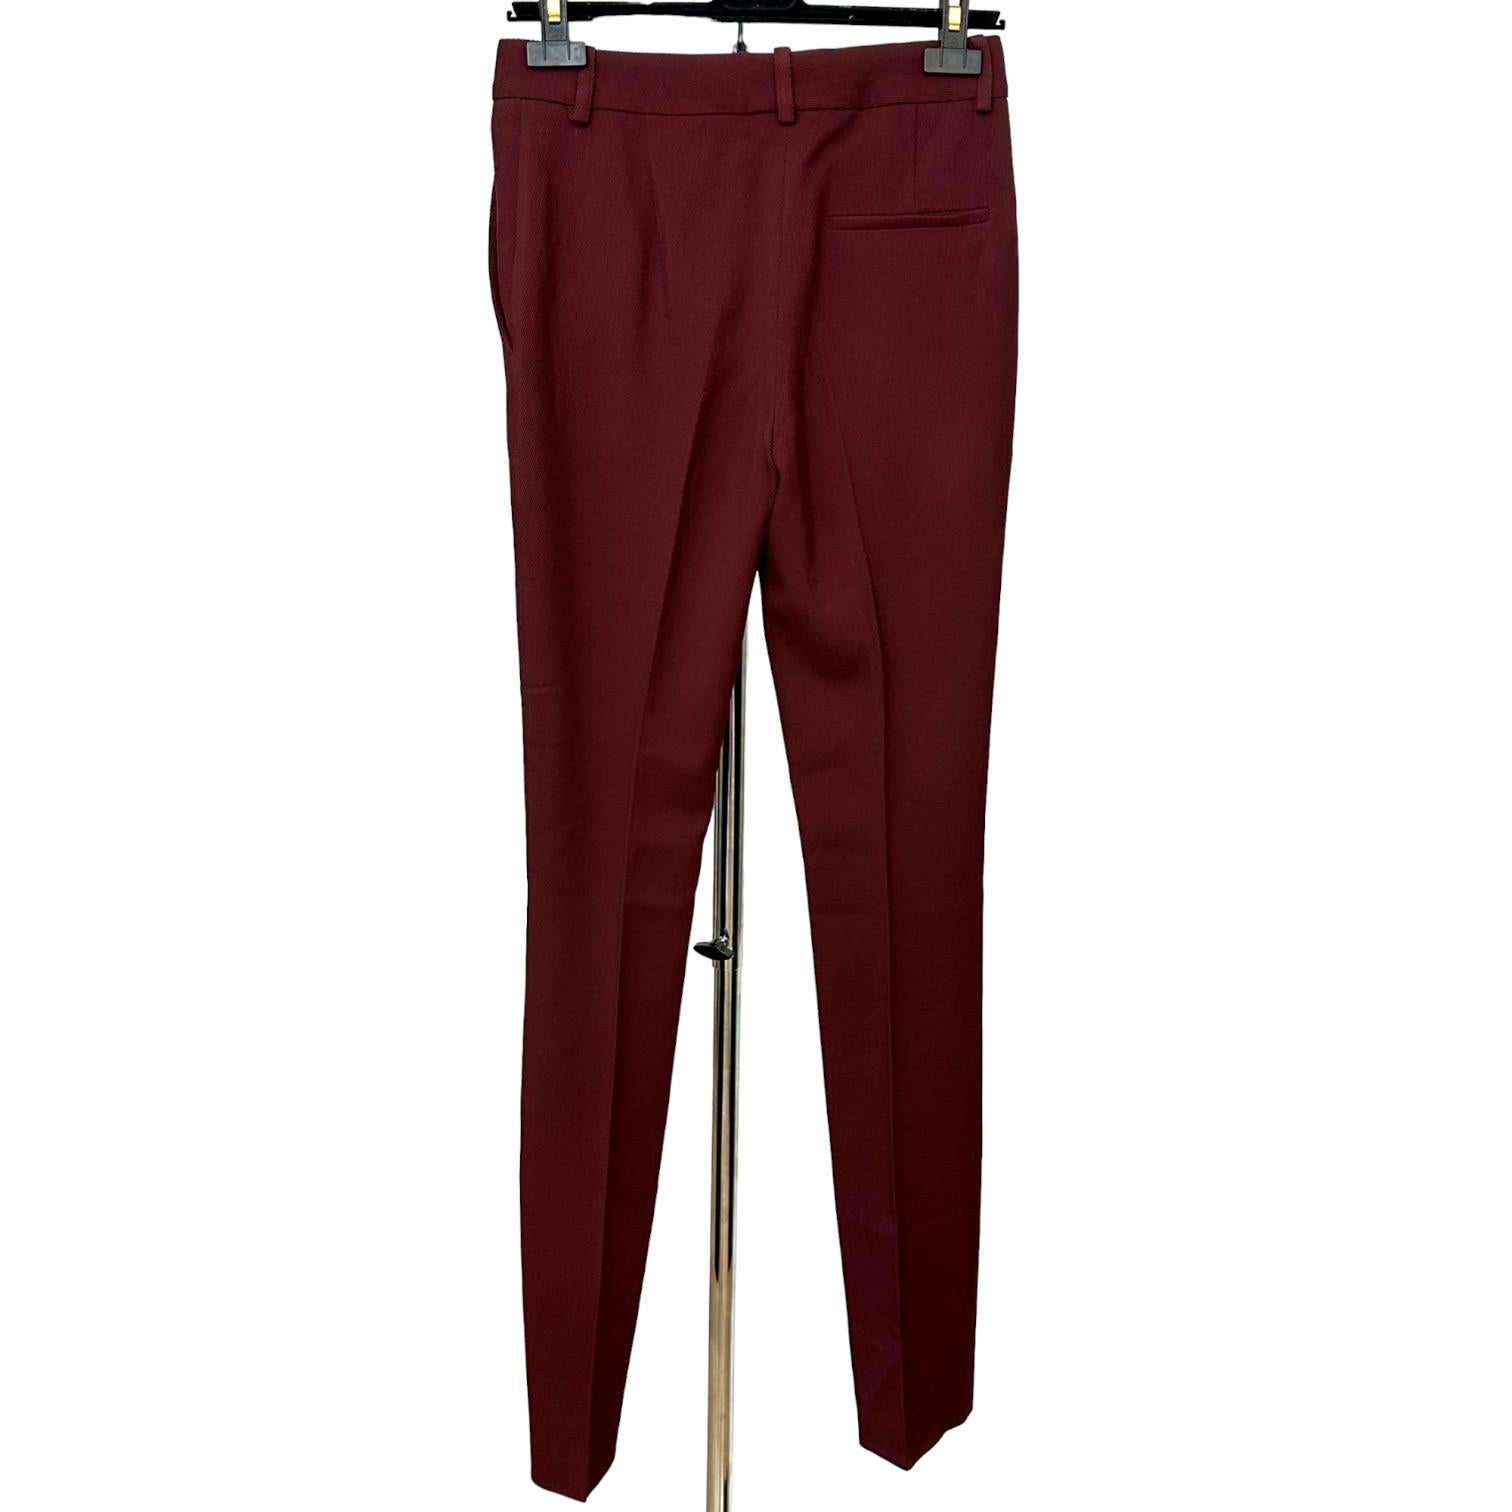 
GUARANTEED AUTHENTIC VICTORIA BECKHAM BORDEAUX WOOL TROUSERS

Details:
• Straight leg.
• Front side slant pockets.
• Front zipper, hook and covered button closure.
• Belt loops.
• Creases.
• Classic silhouette.

Fabric: 100% Wool

Size: US